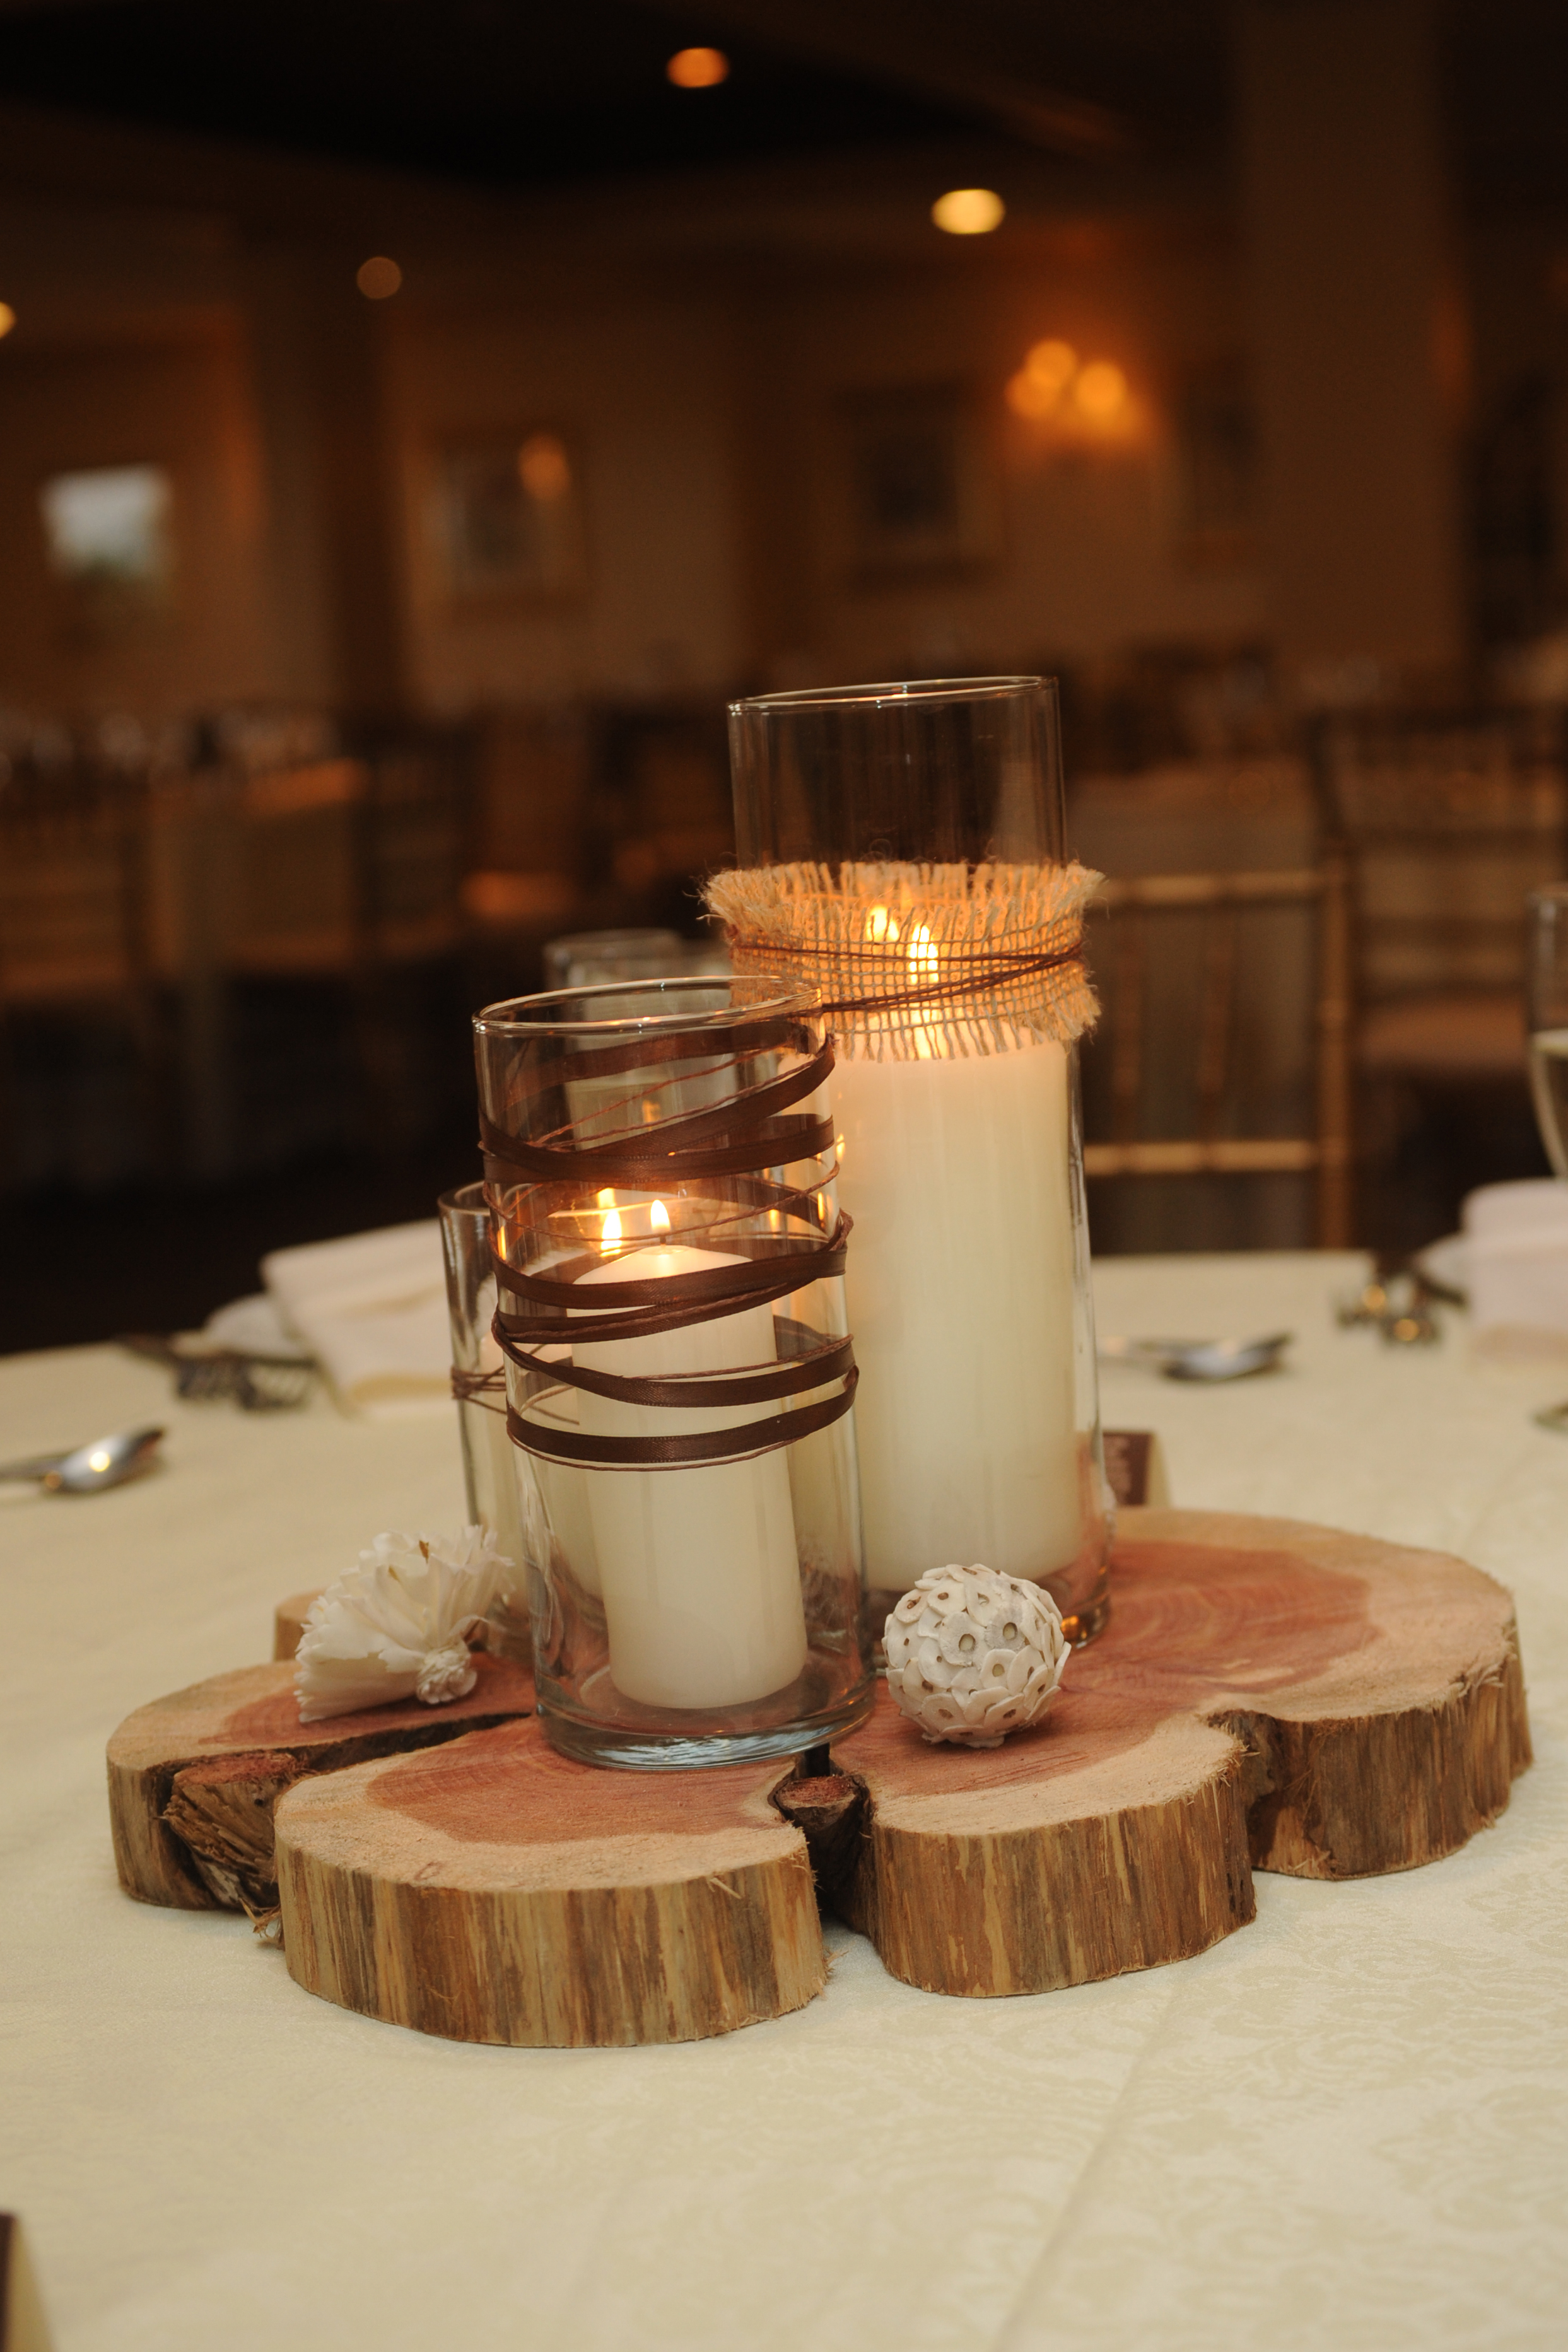 28 Homemade Table Decorations For Weddings Cheap